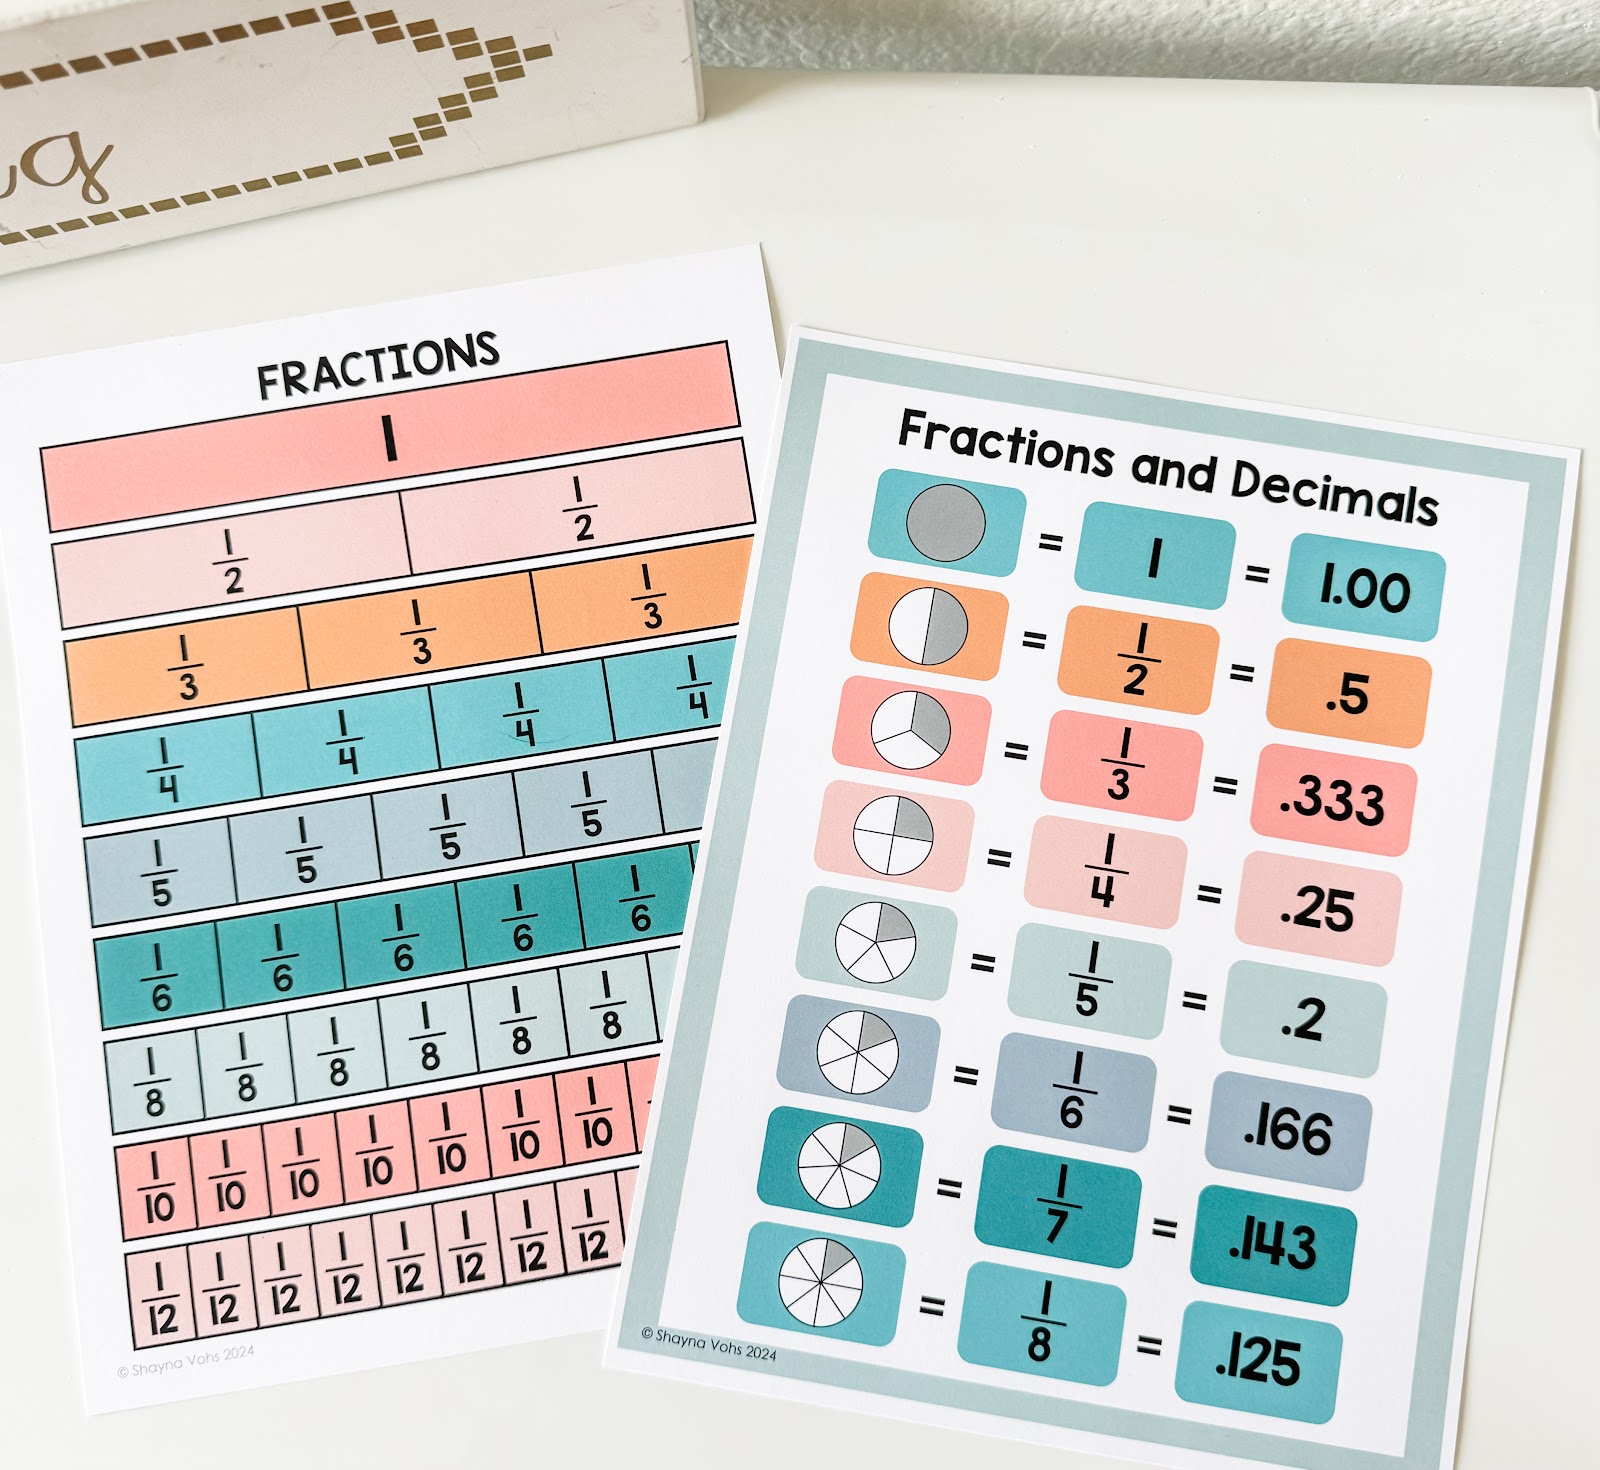 This image shows two different fraction resources. The one on the left is filled with fraction strips in different colors. The one on the right shows a visual of a fraction, the written fraction, and the associated decimal. 